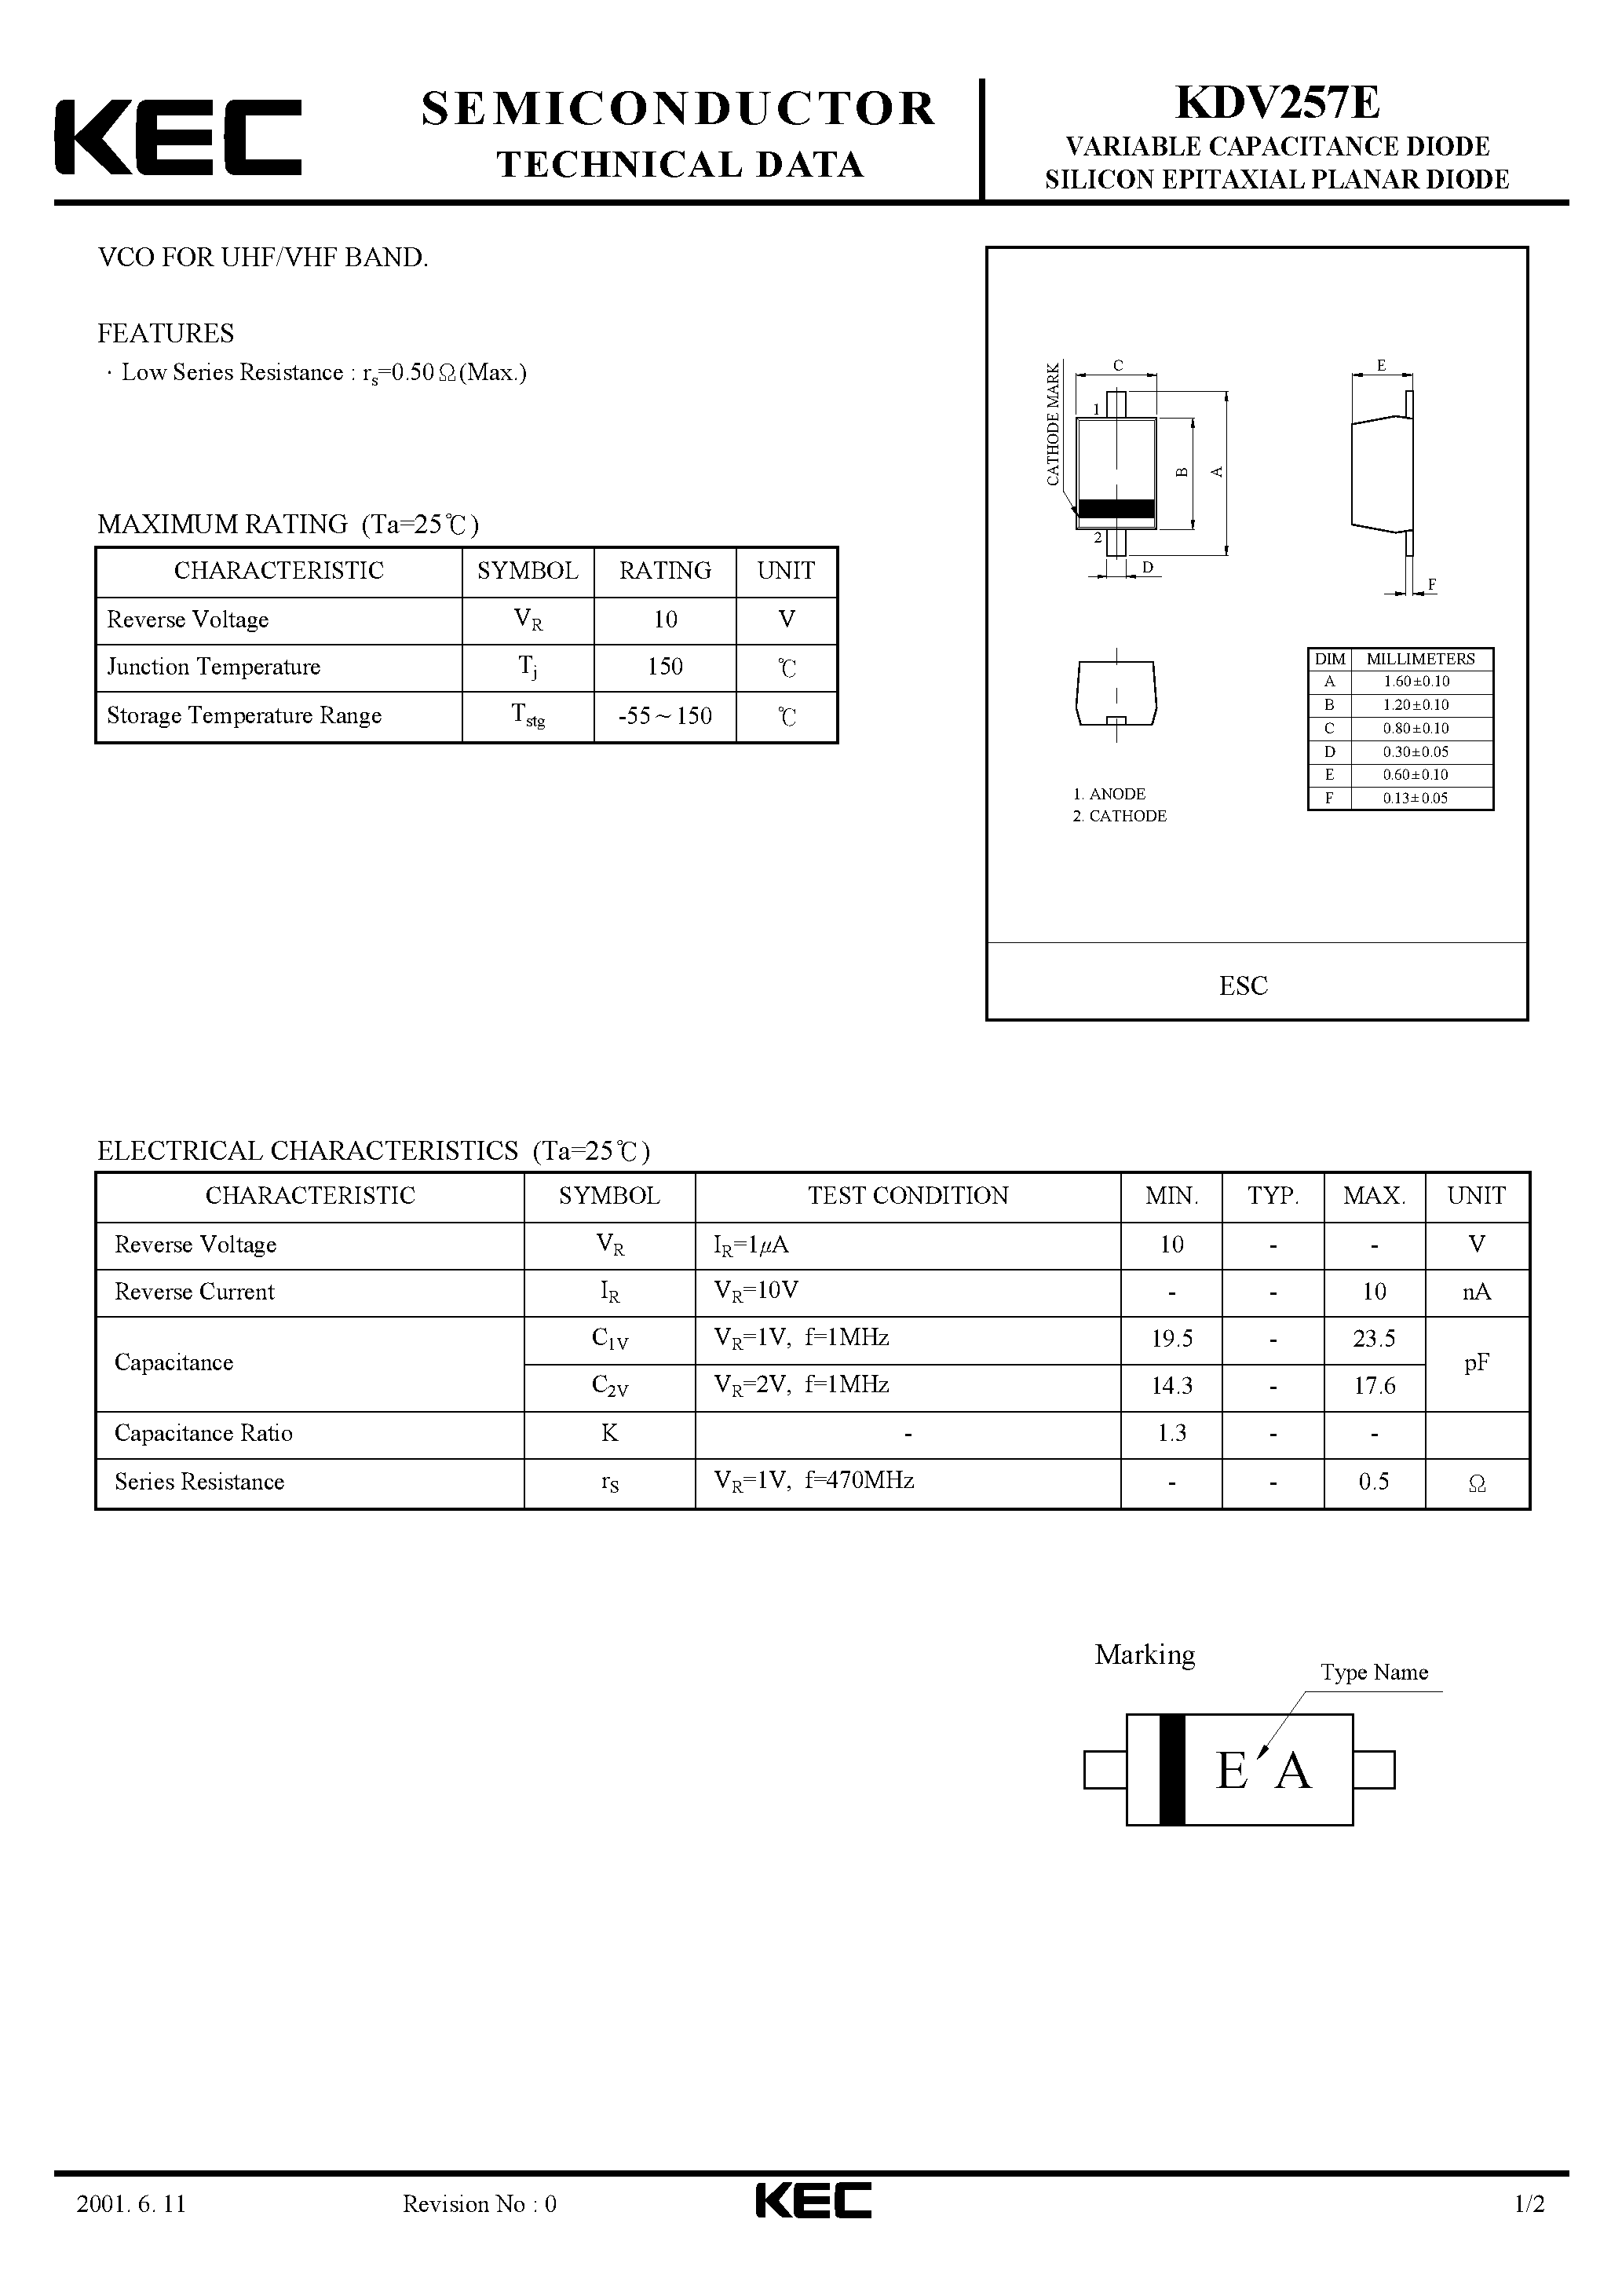 Datasheet KDV257E - VARIABLE CAPACITANCE DIODE SILICON EPITAXIAL PLANAR DIODE(VCO FOR UHF/VHF BAND) page 1